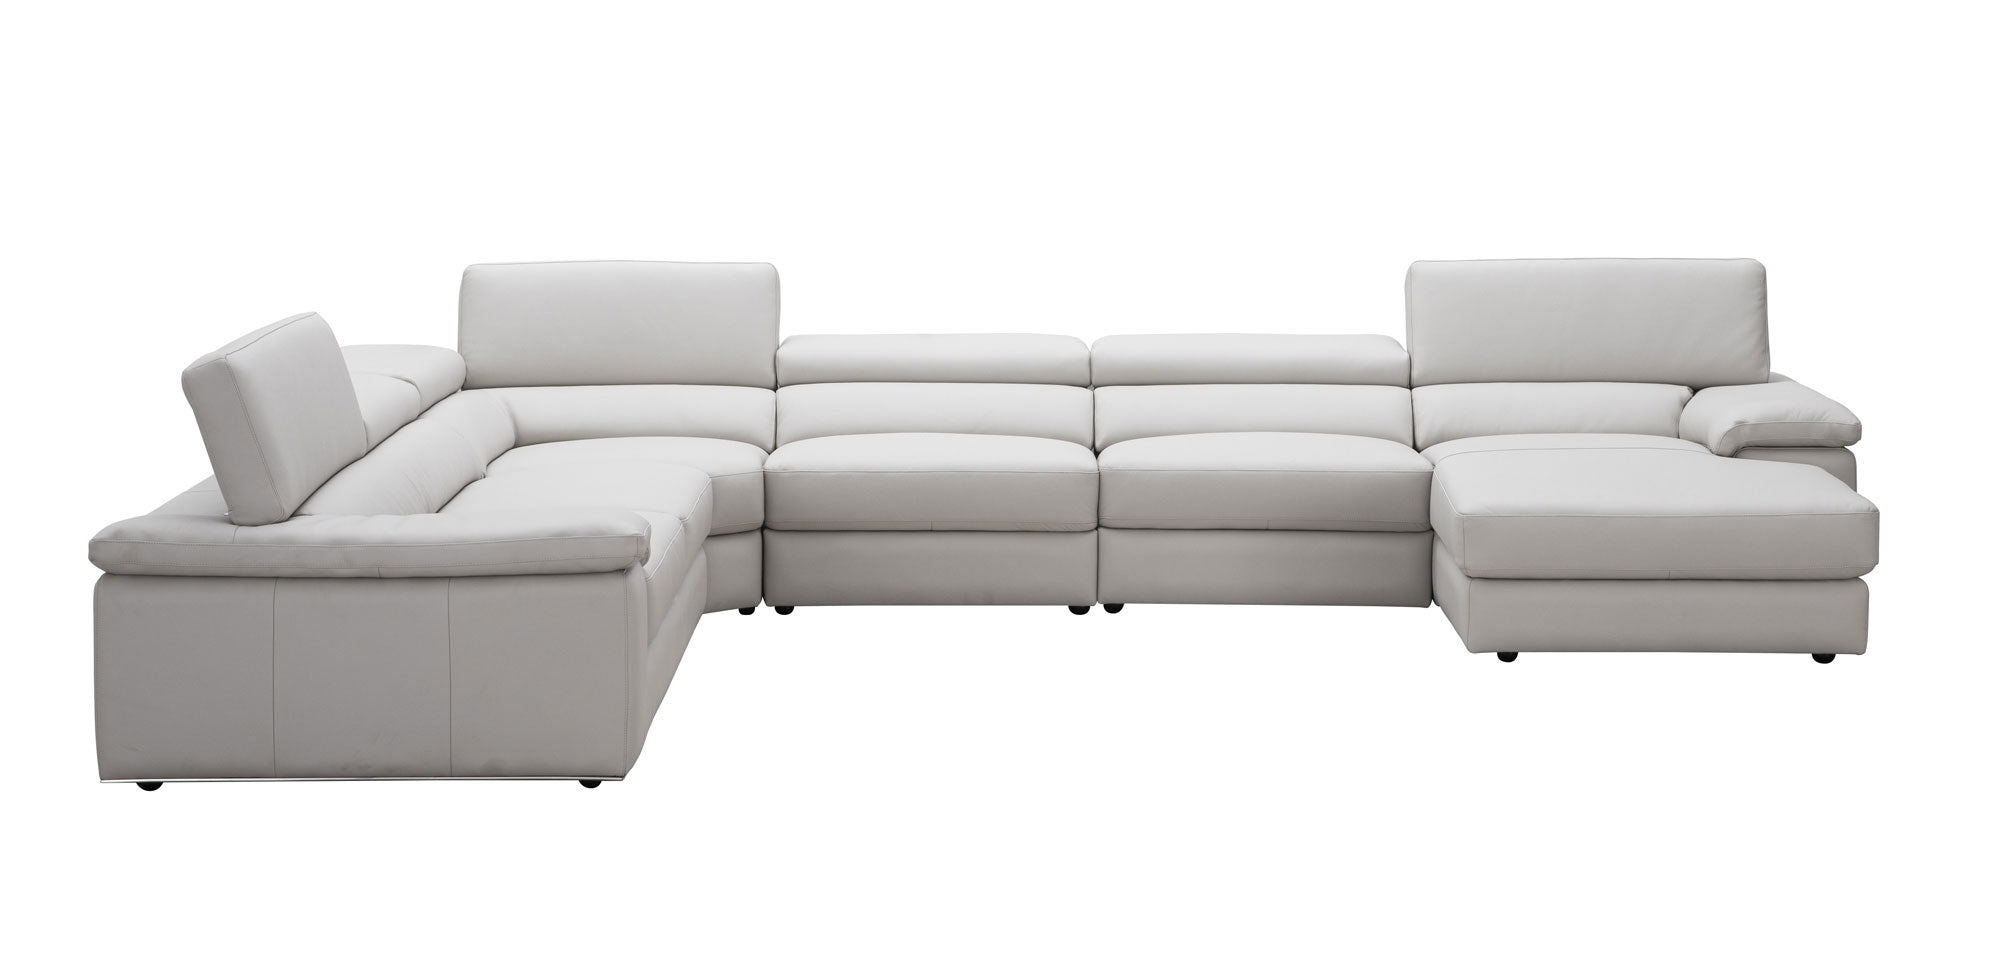 Kobe Leather Sectional in Silver Grey | J&M Furniture